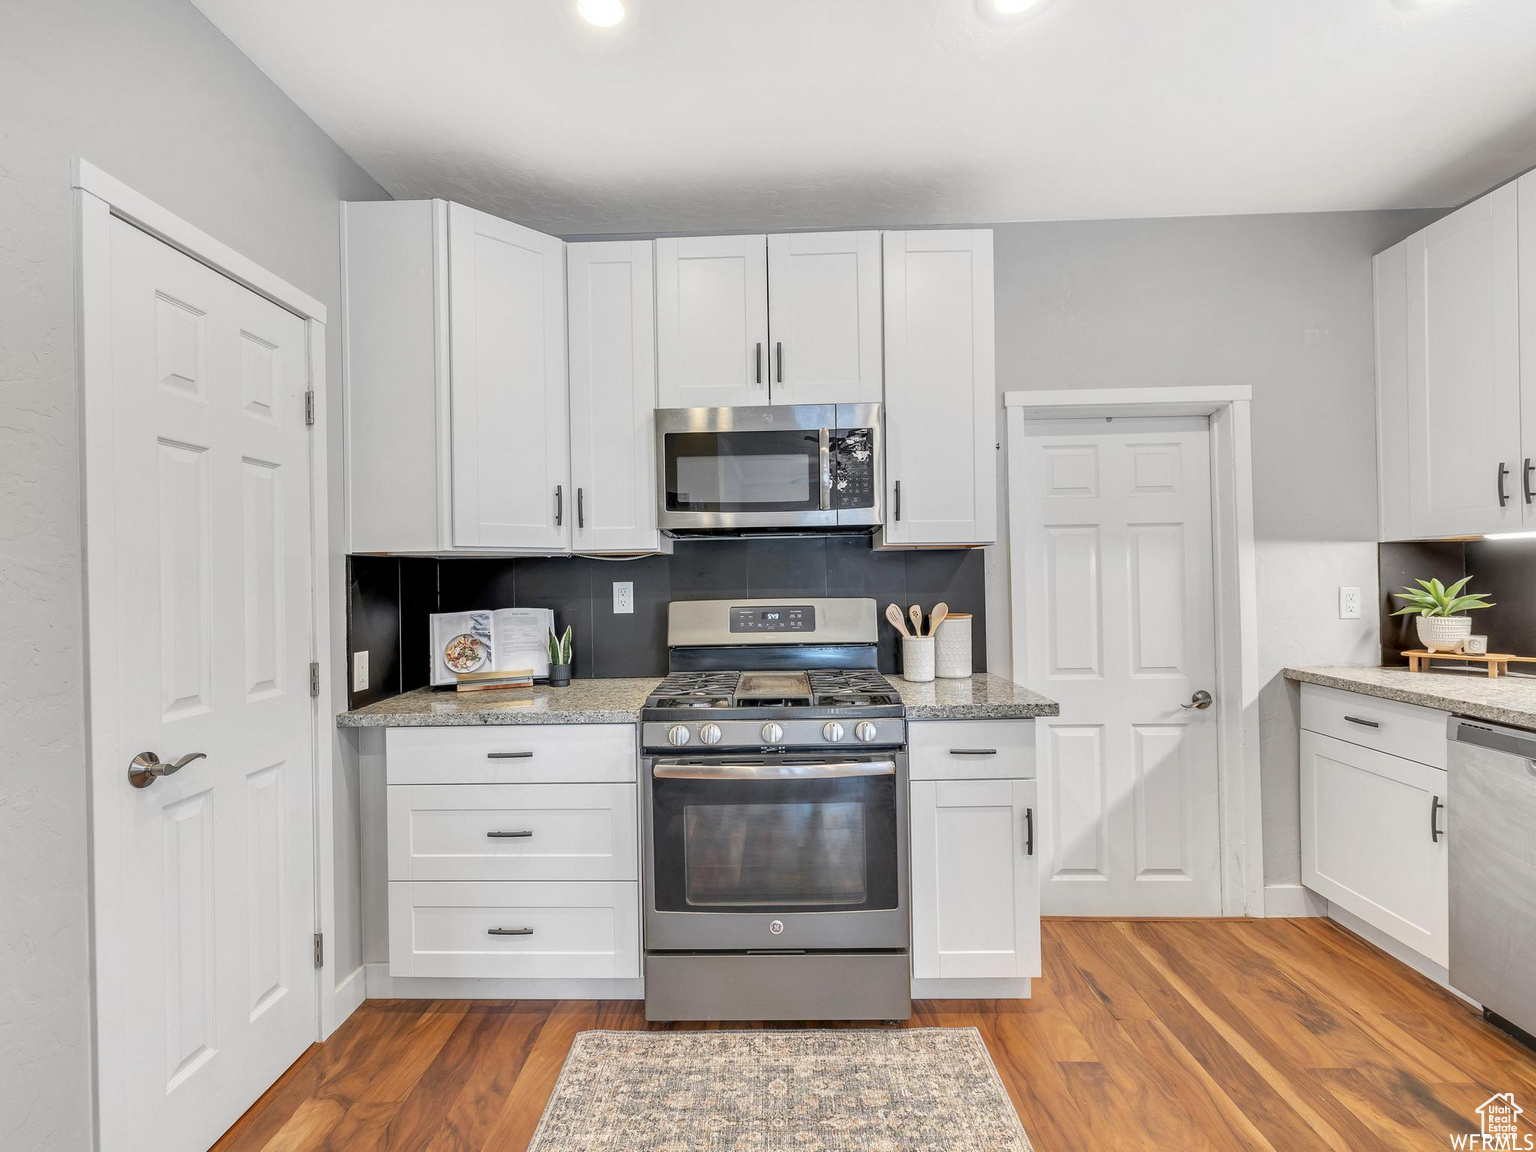 Updated Kitchen with light stone countertops, appliances with stainless steel finishes, light hardwood / wood-style flooring, backsplash, and white cabinets